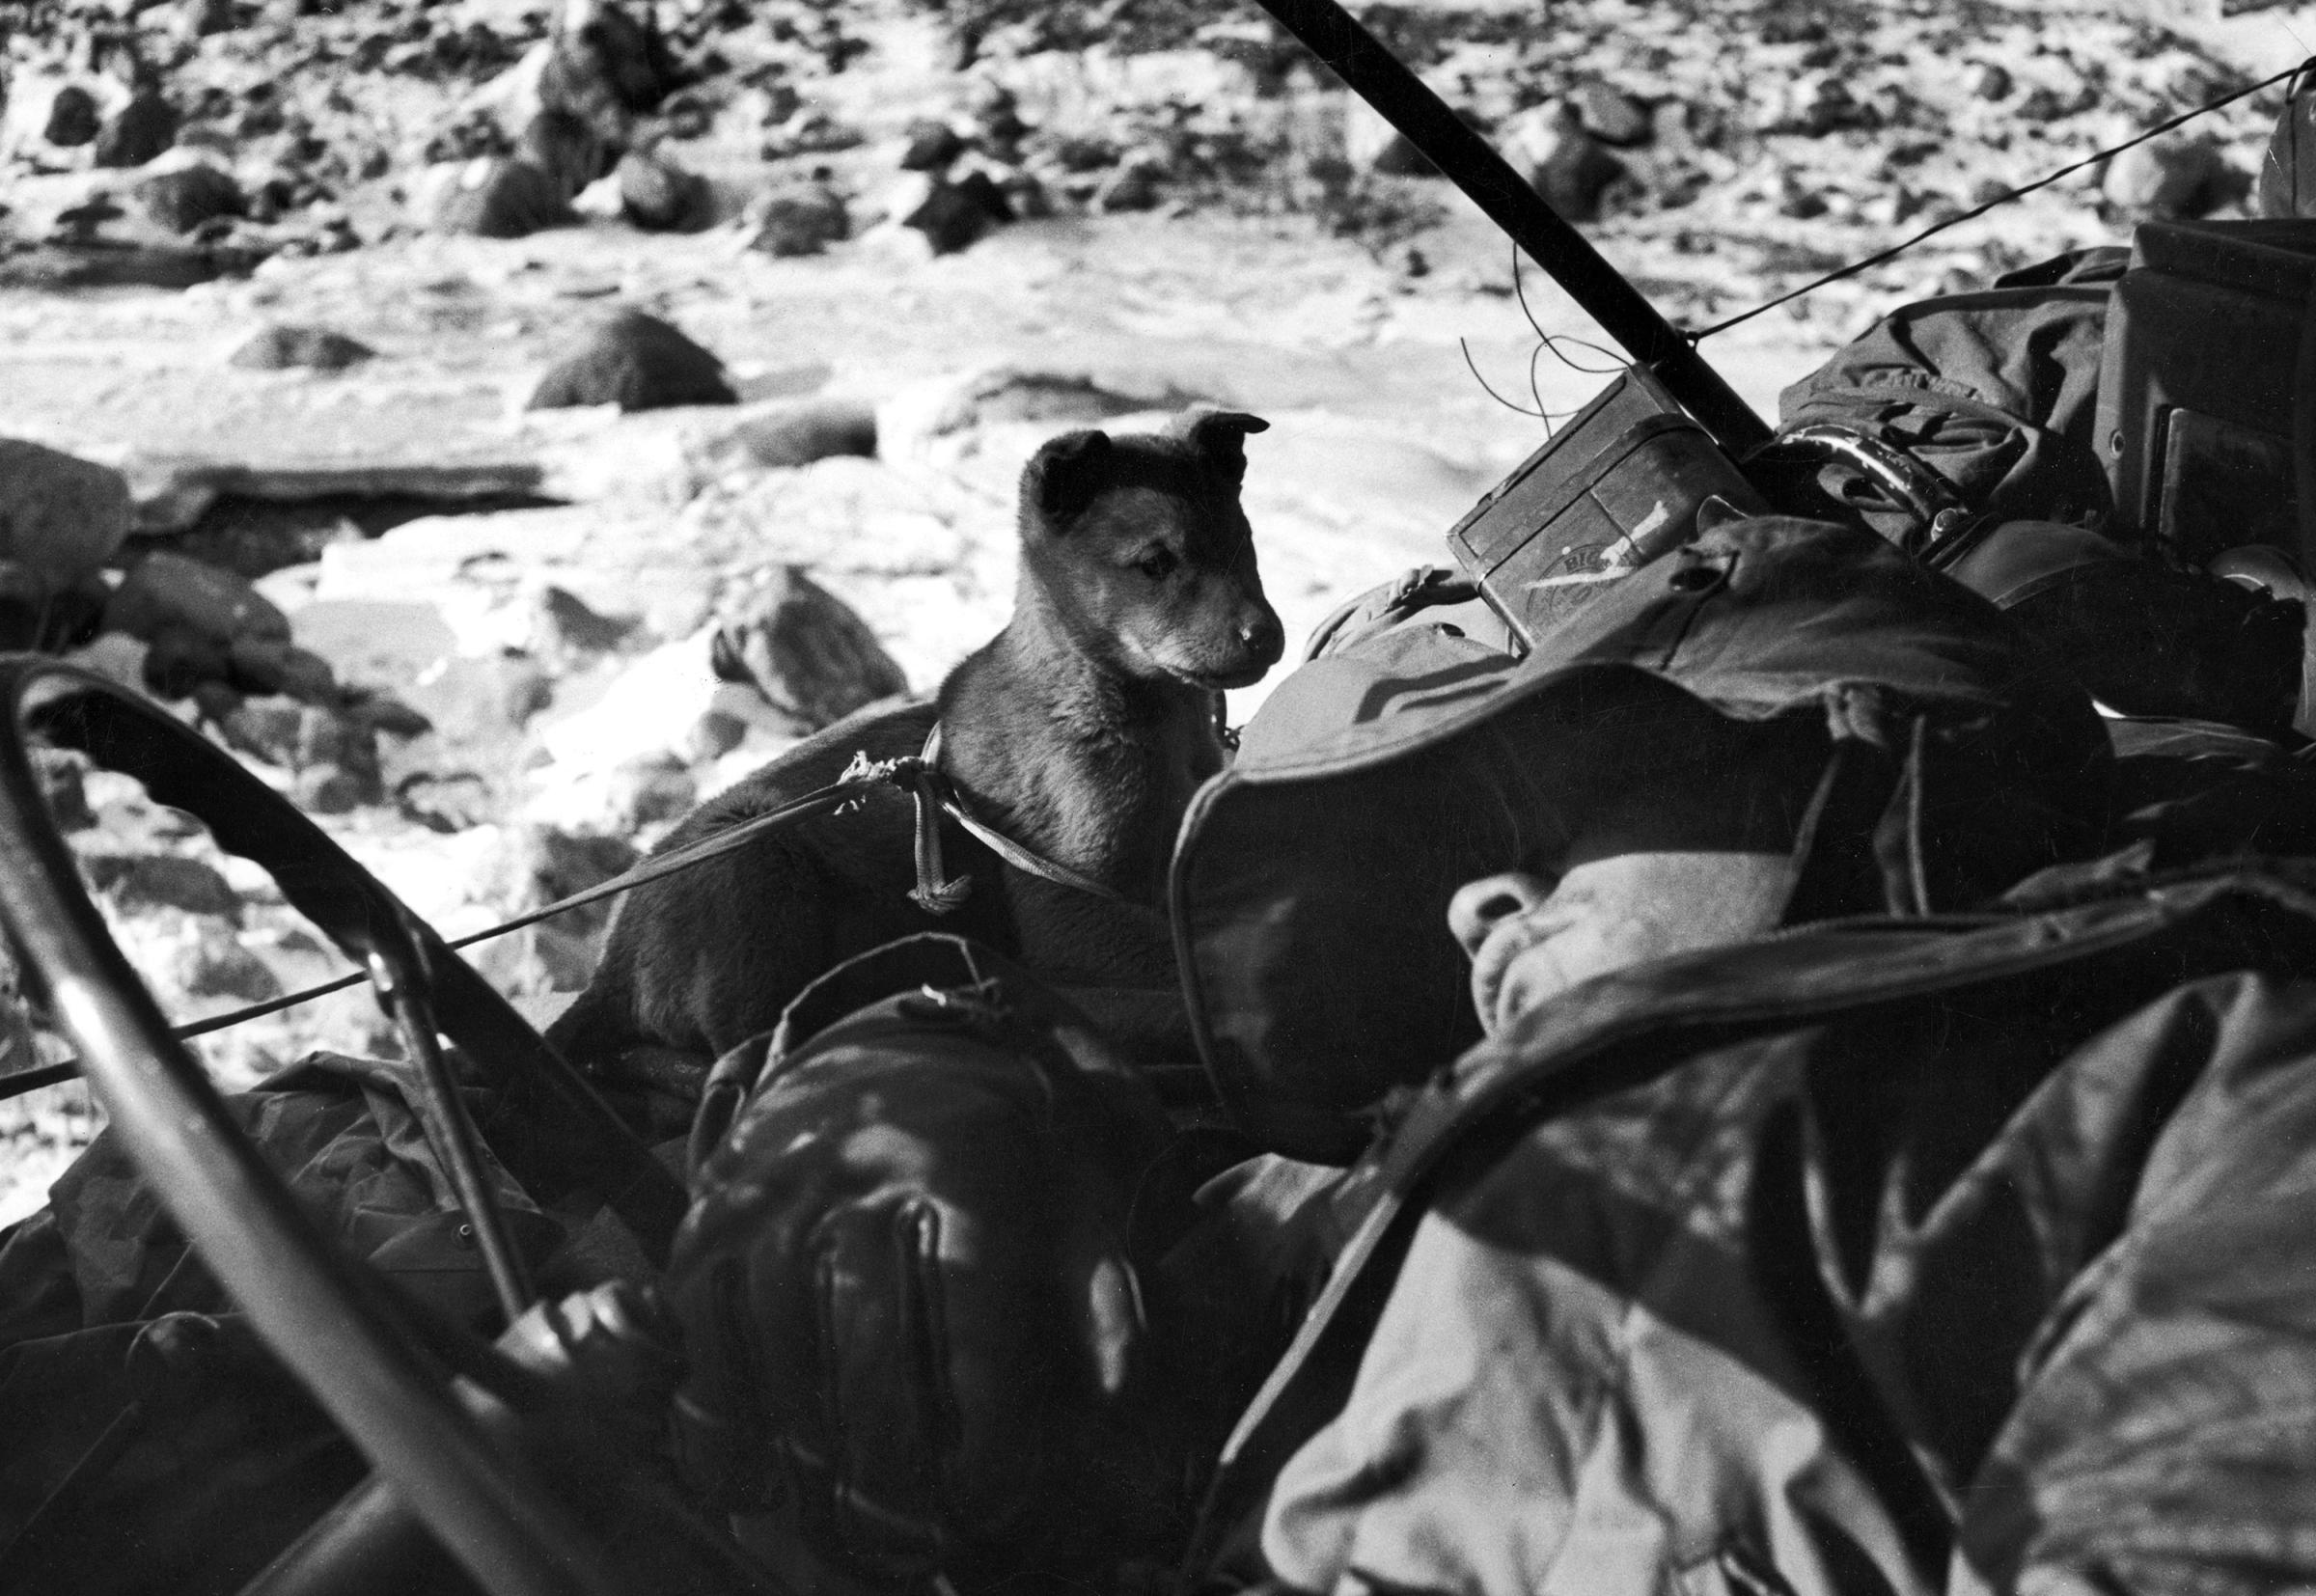 An American Marine sleeps in his halted jeep while a puppy whines in his ear during the retreat from the Chosin Reservoir, December 1950.